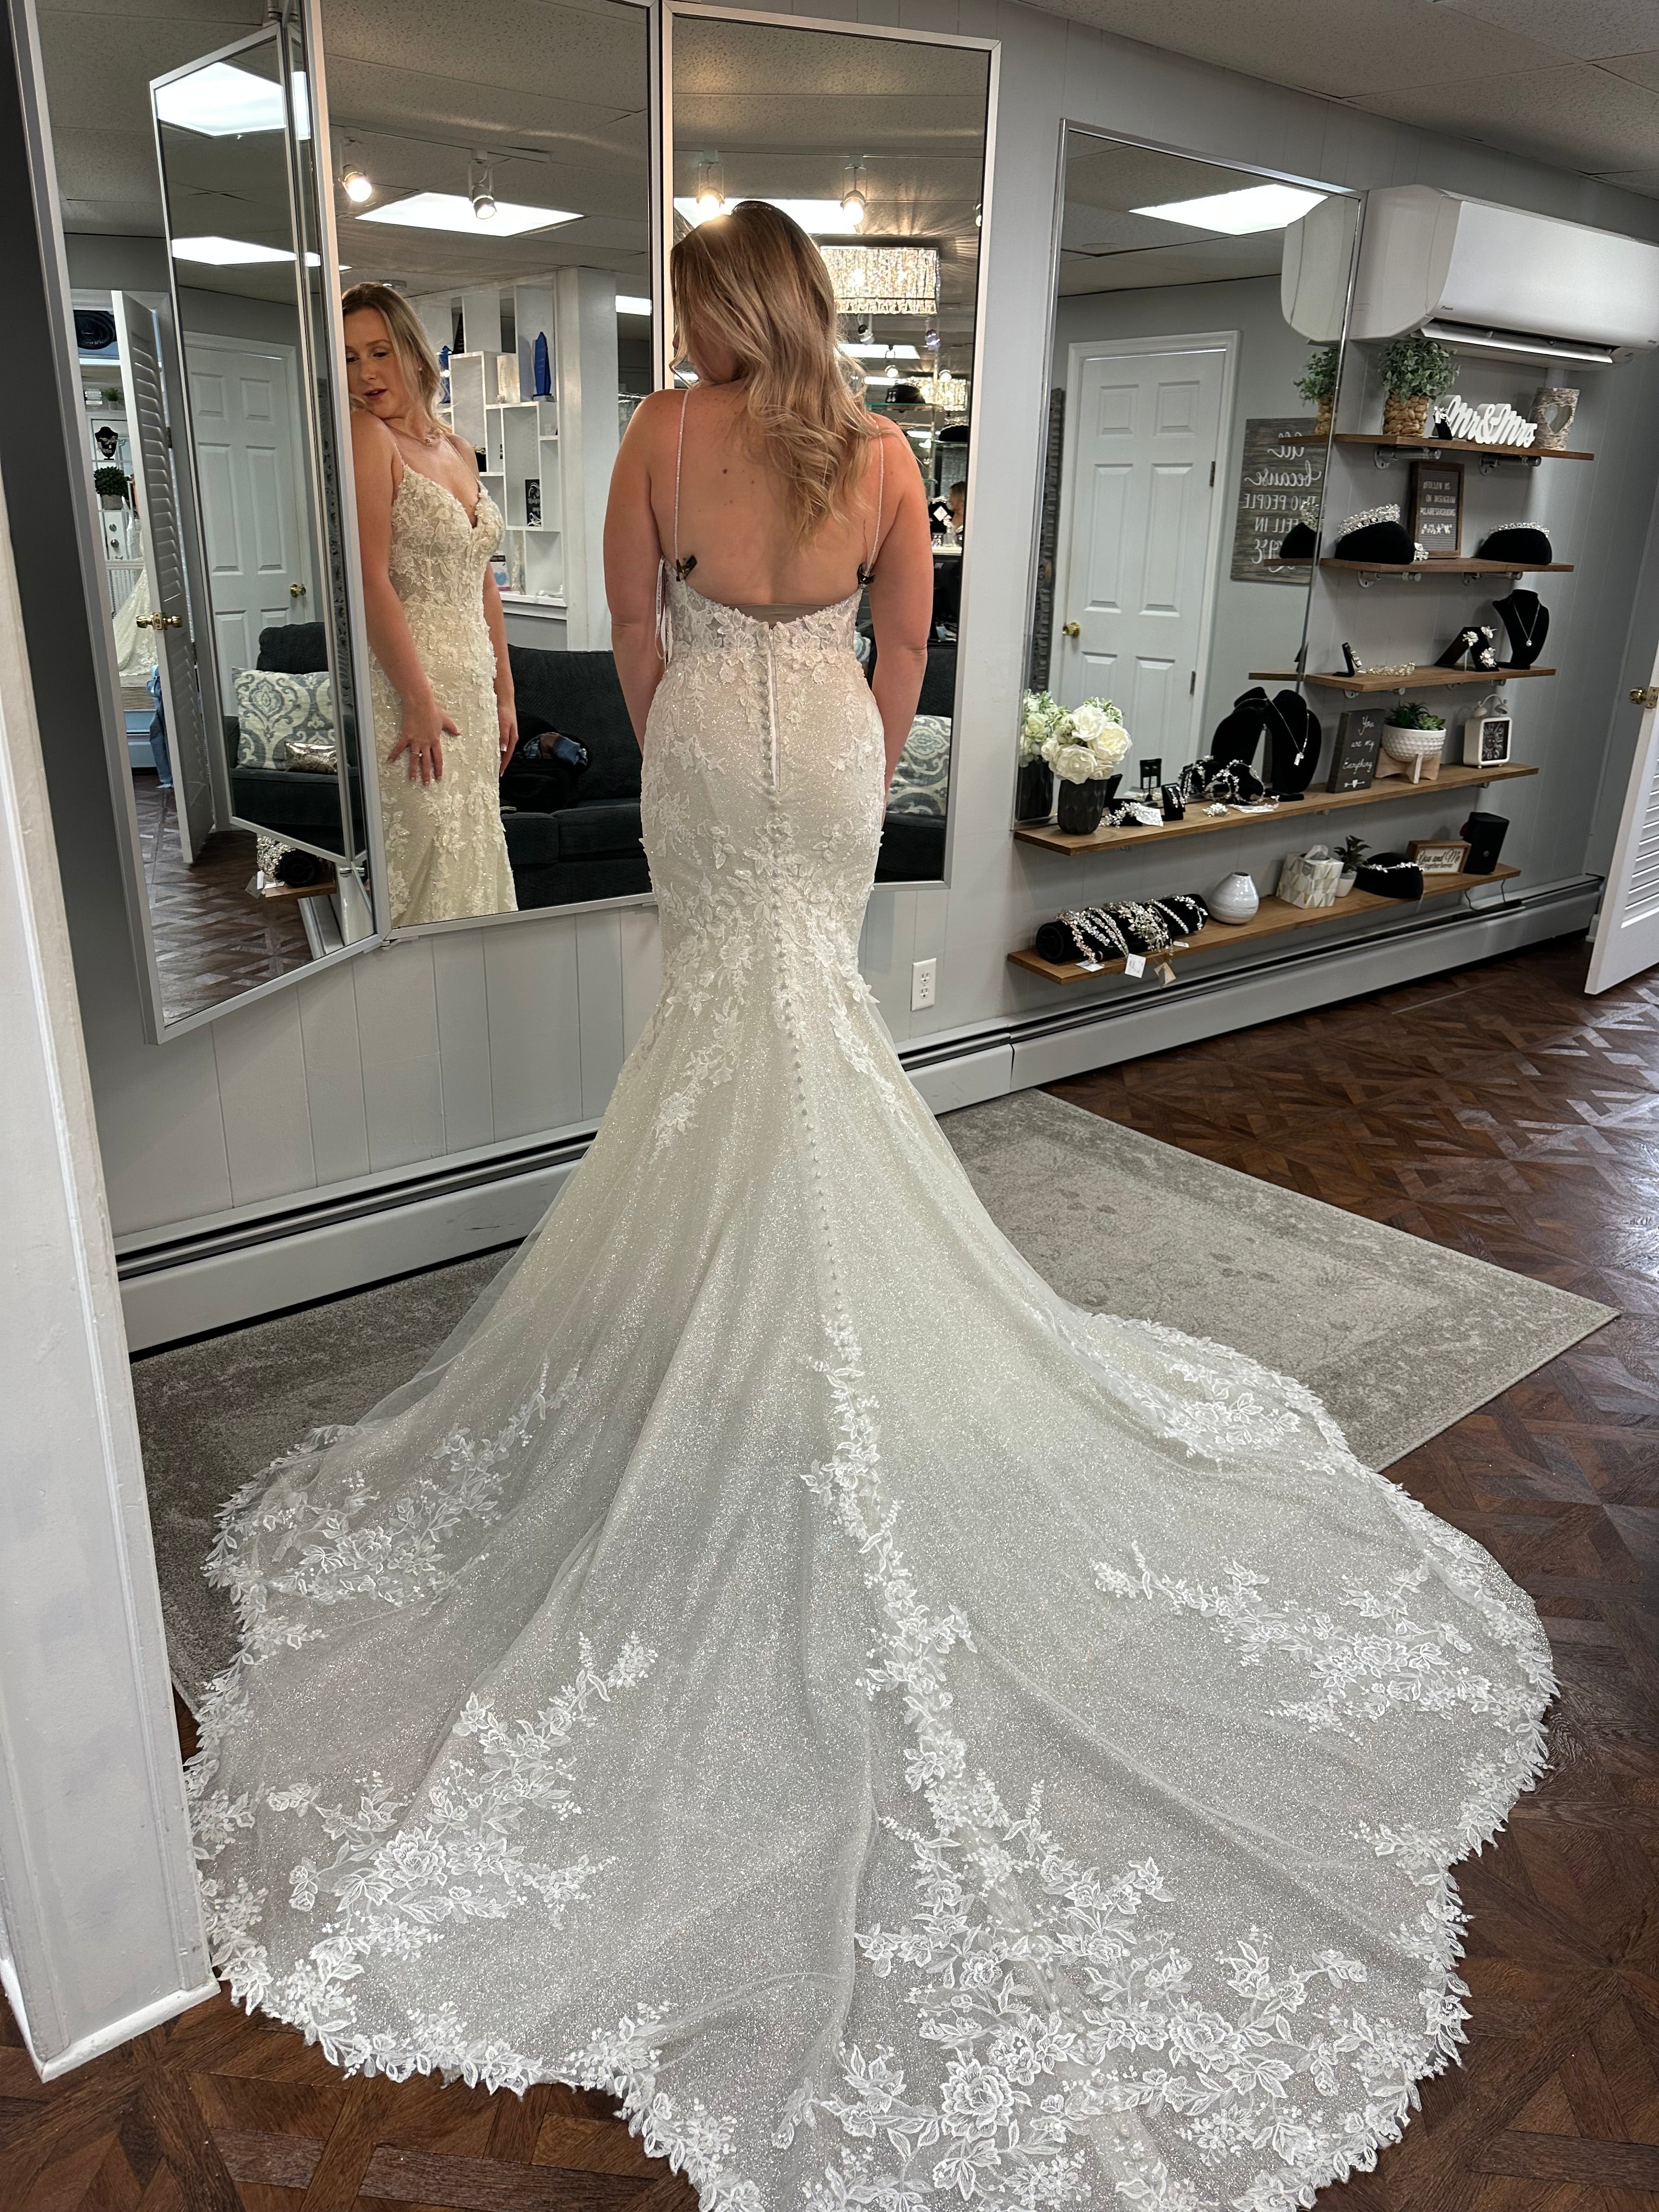 Selling Preowned Wedding Dresses